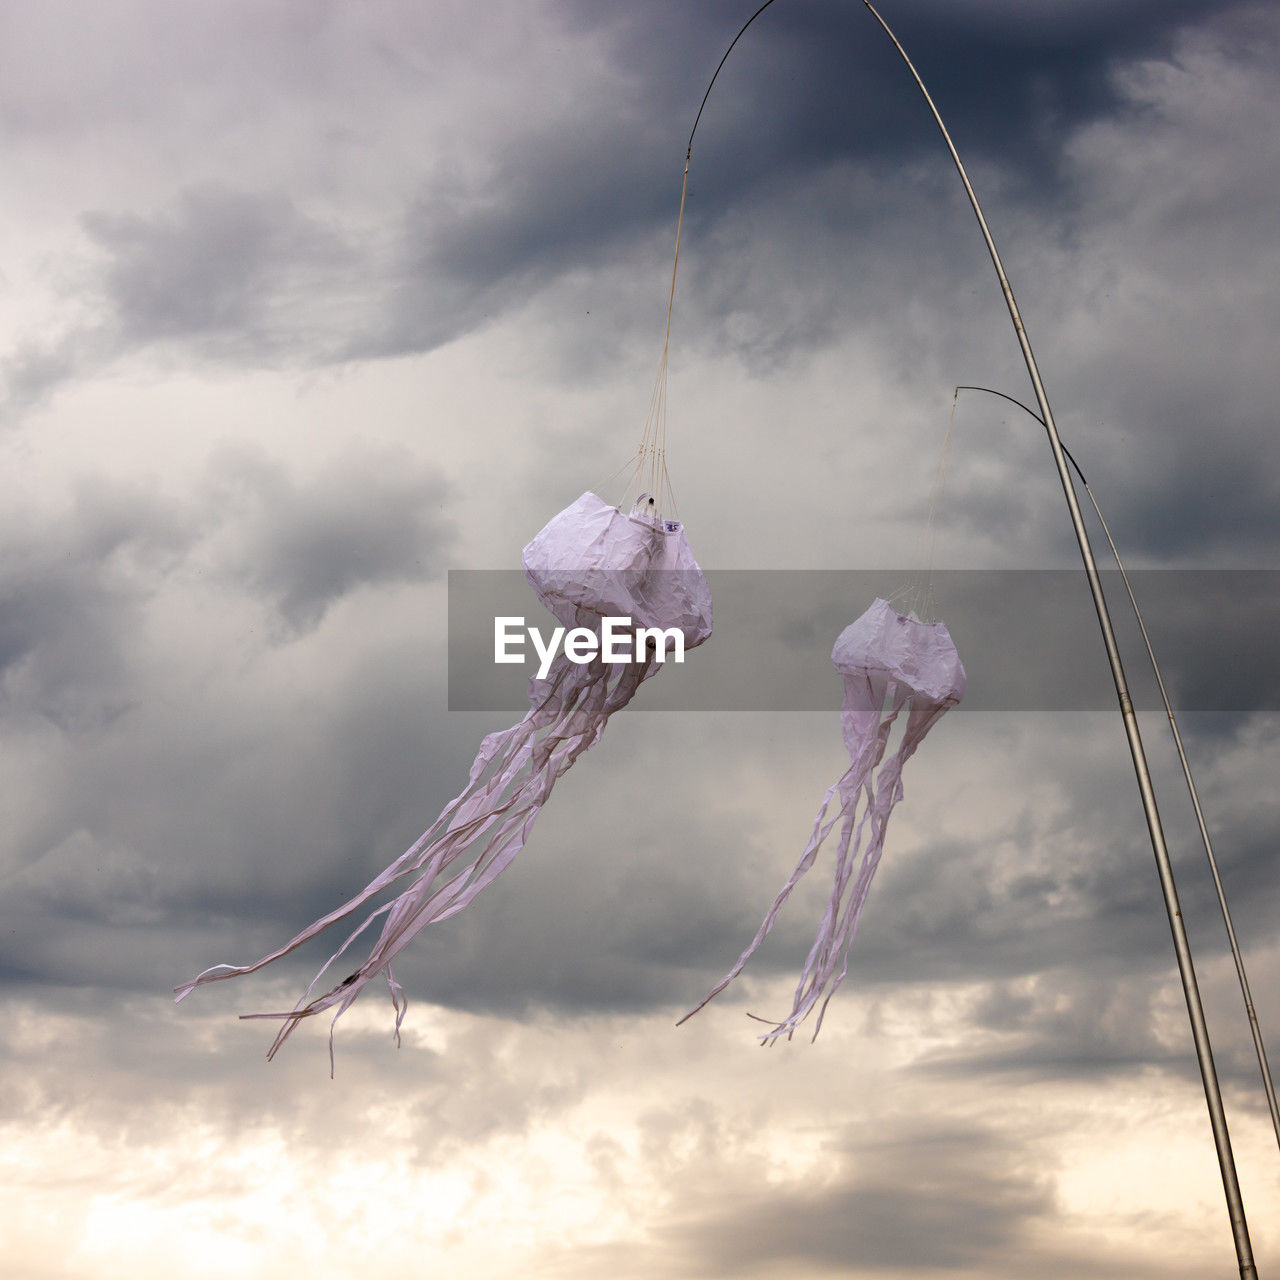 cloud, sky, nature, wind, no people, hanging, outdoors, rope, flying, environment, storm, low angle view, cloudscape, day